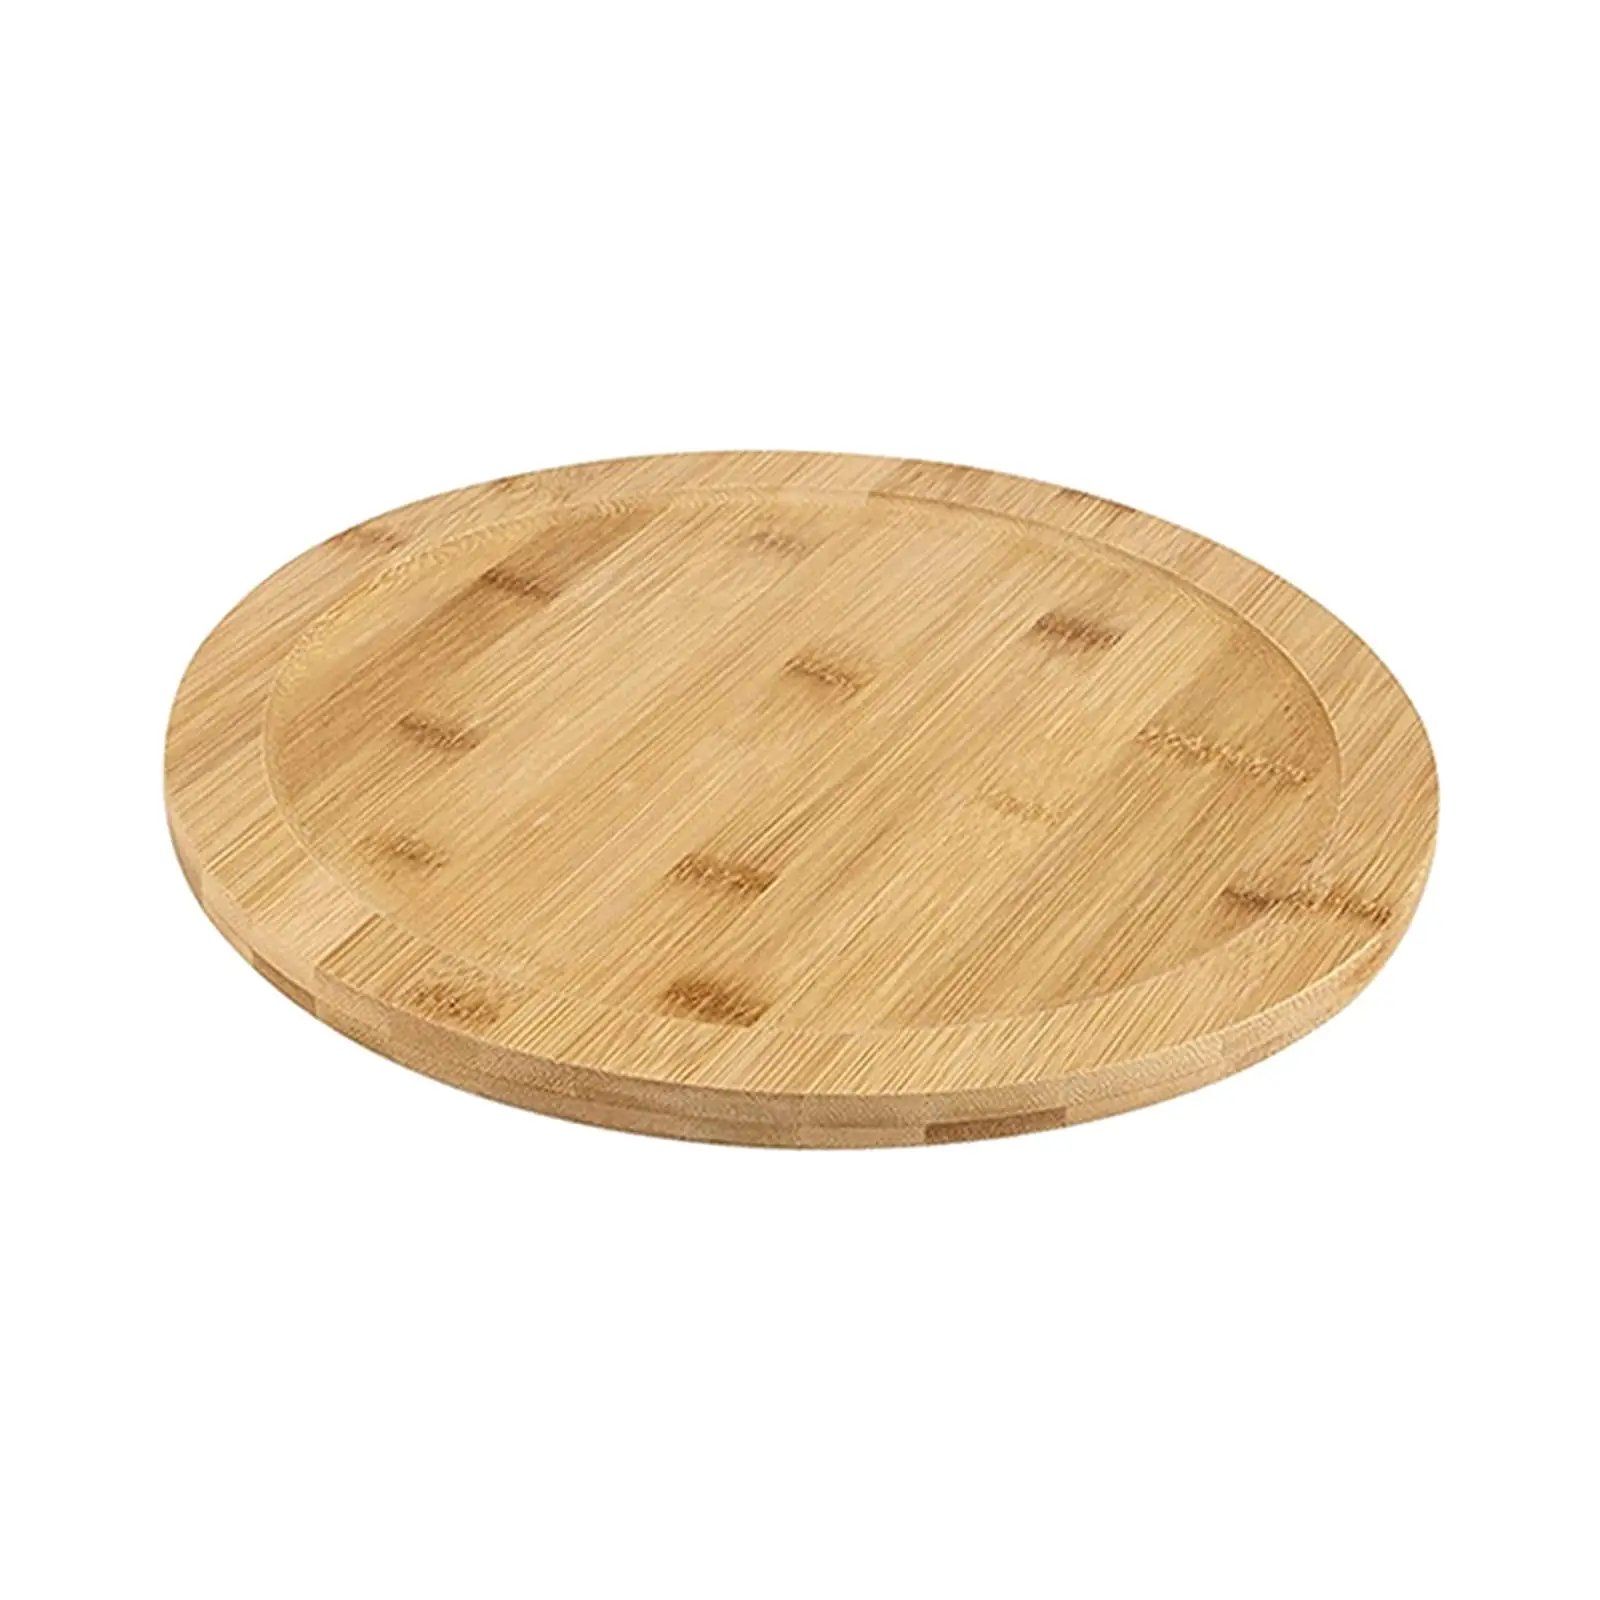 Wooden Turntable Serving Tray Pizza Serving Board Rotating Board Wooden Rotating Dining Plate for Dining Table Home Kitchen